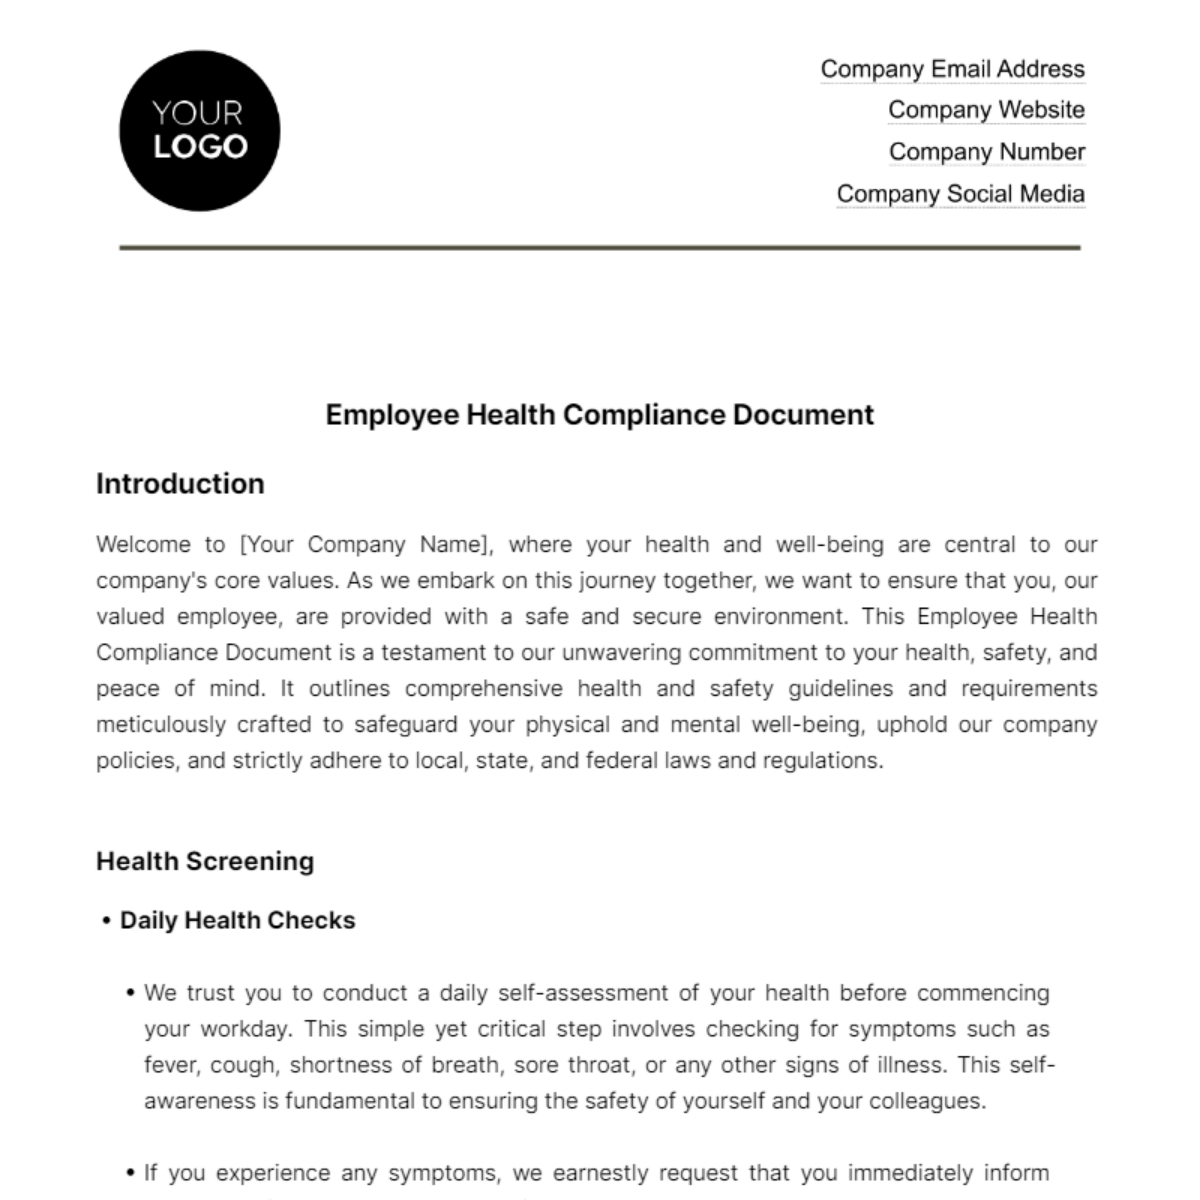 Free Employee Health Compliance Document HR Template